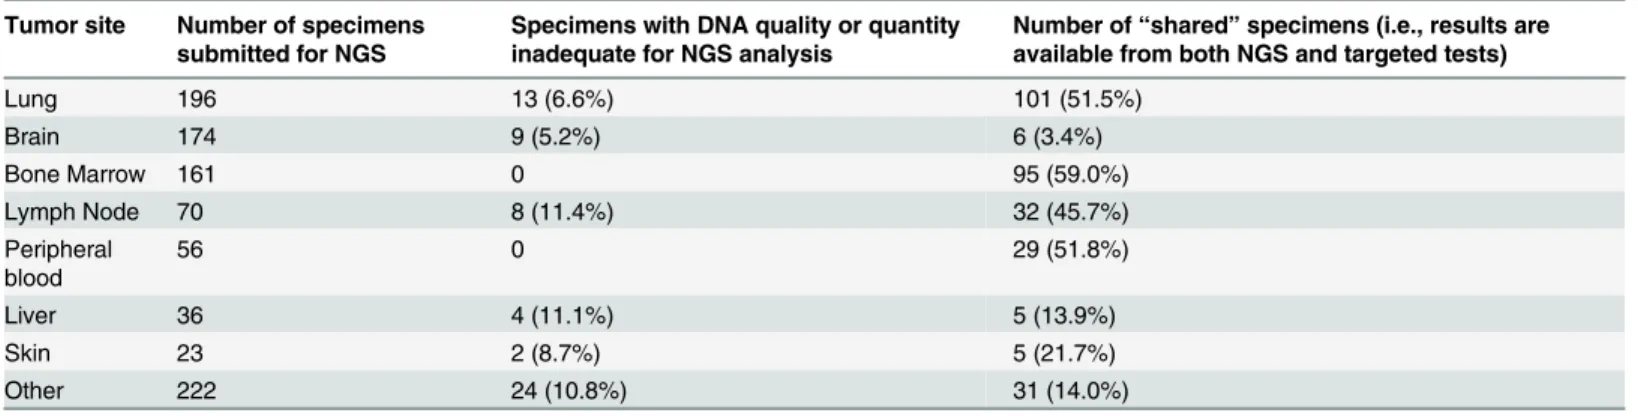 Table 1. Characteristics of Specimens by Tumor Site.